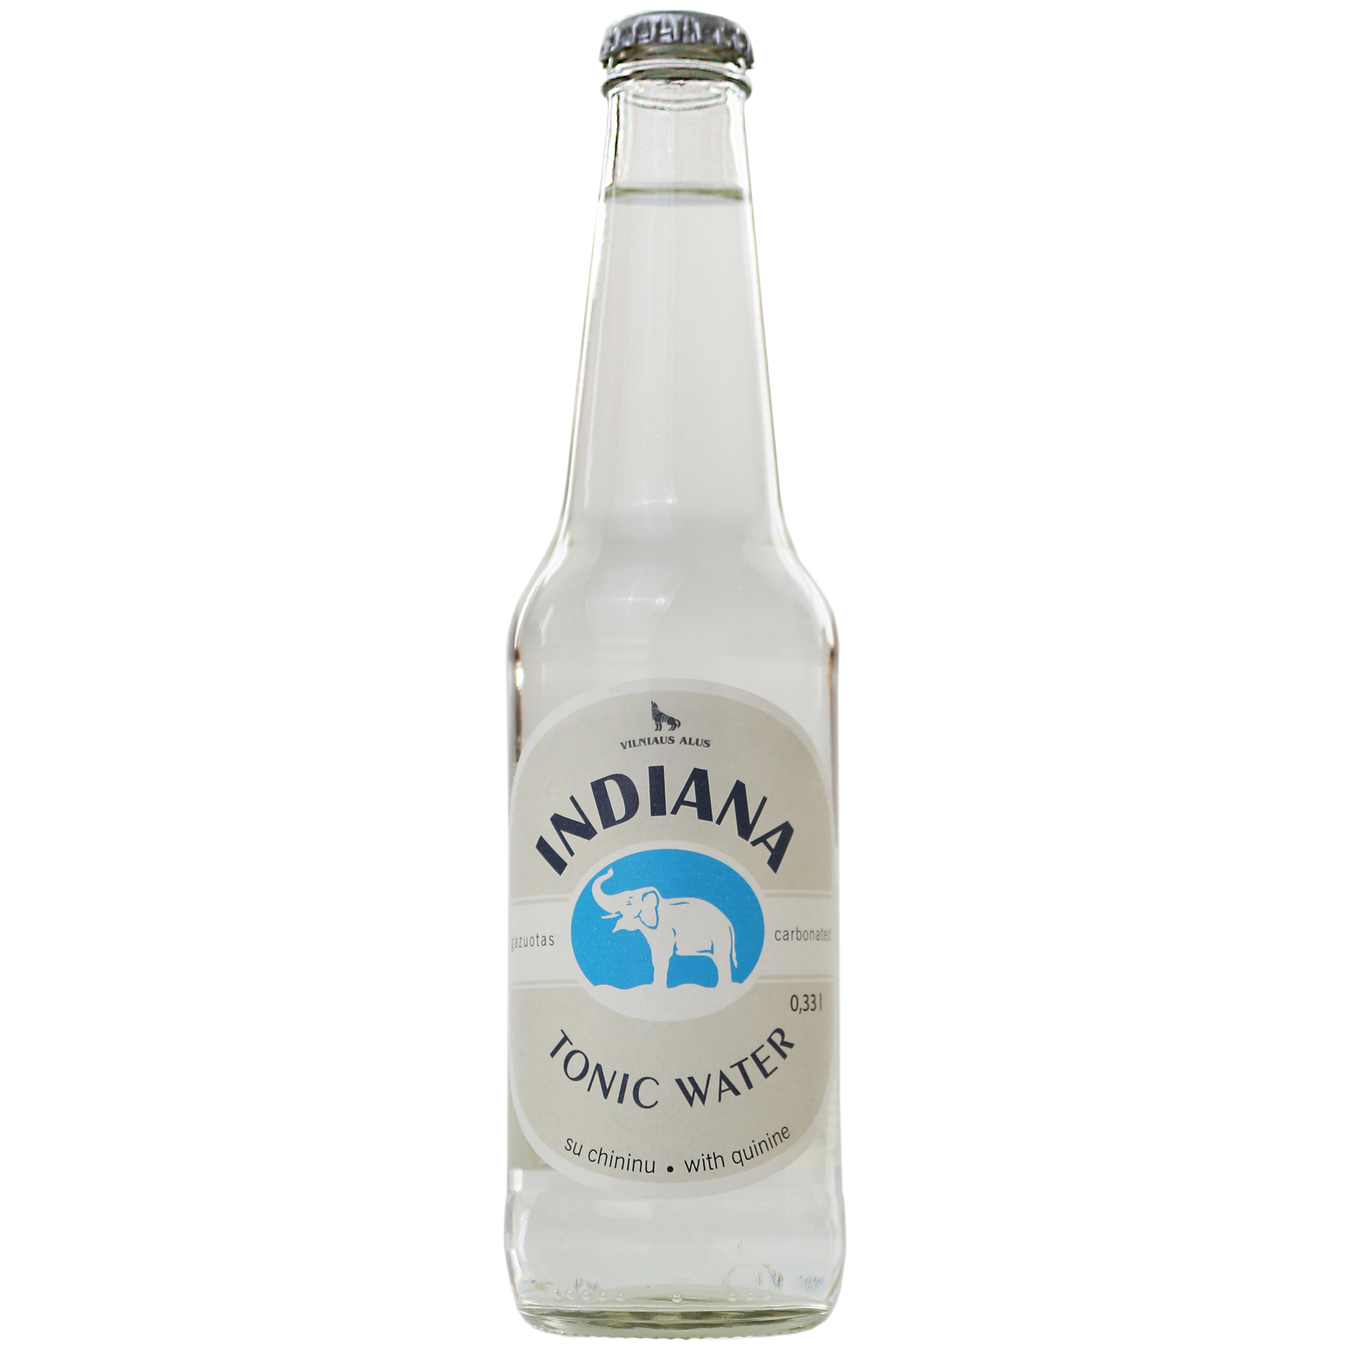 Carbonated drink Indiana tonic quinine 0.33 l glass